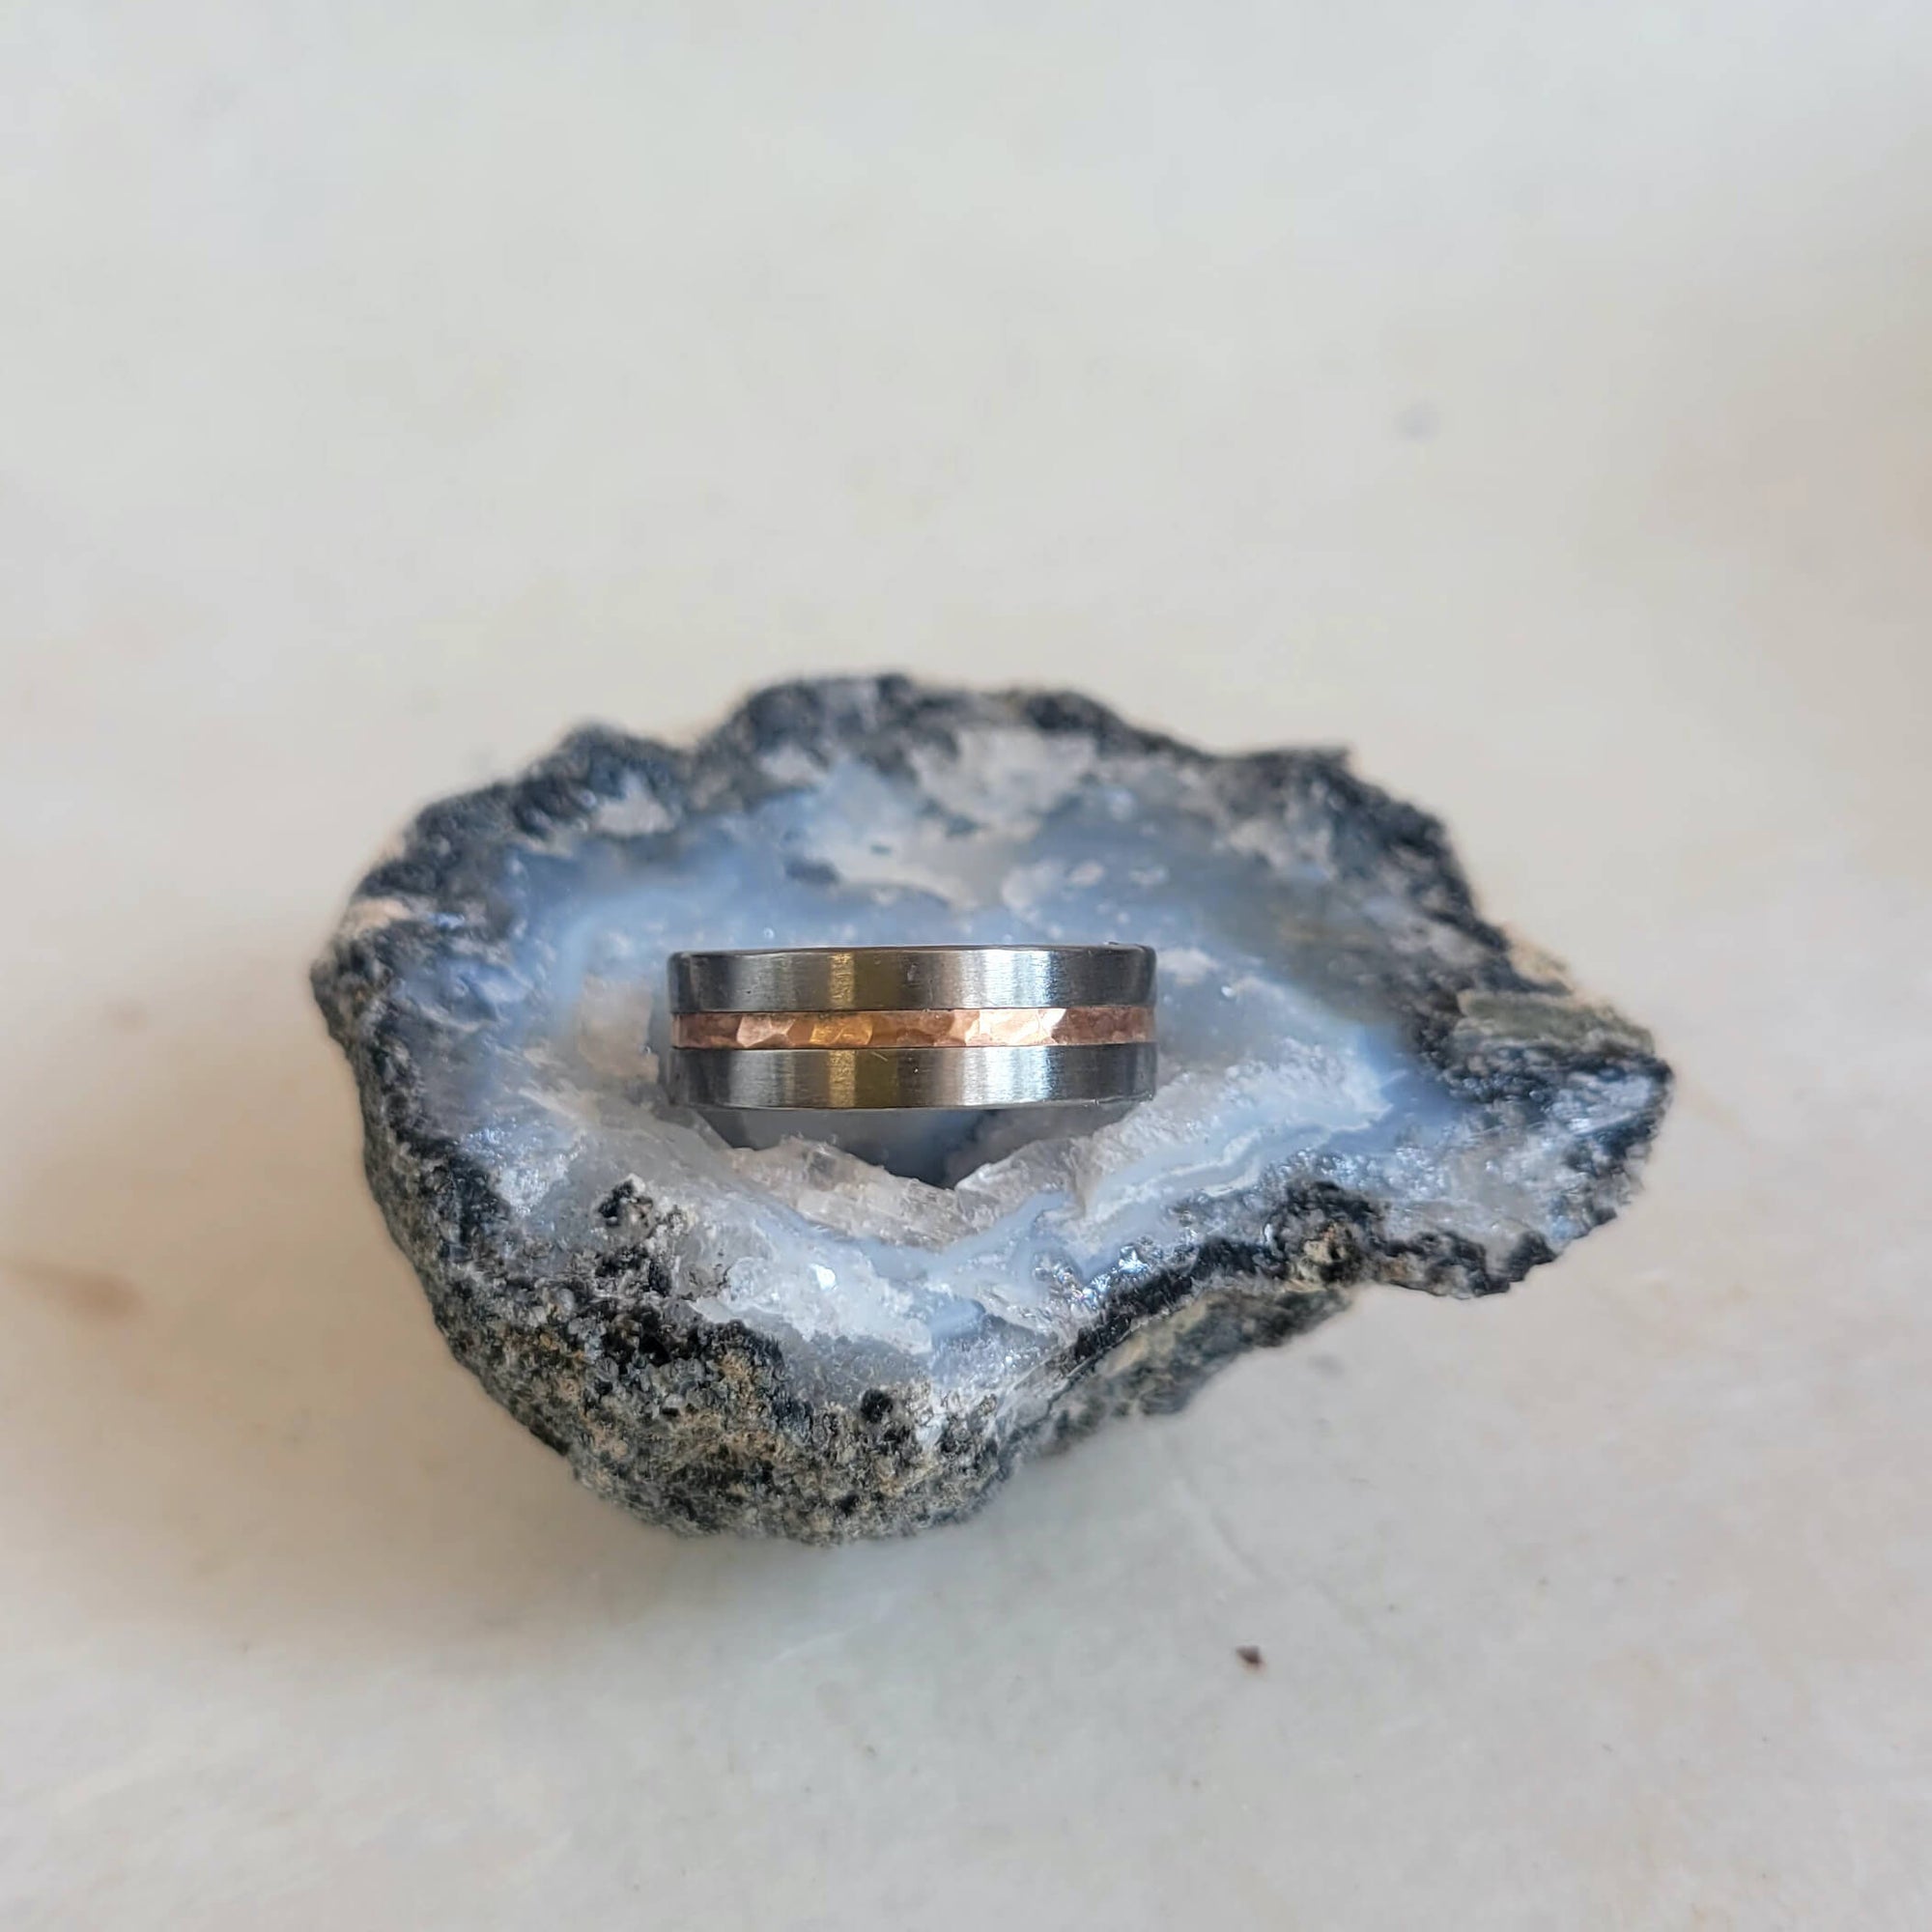 Handmade palladium and red gold mixed metal wedding band. Made by EC Design Studio in Minneapolis, MN using recycled metal.